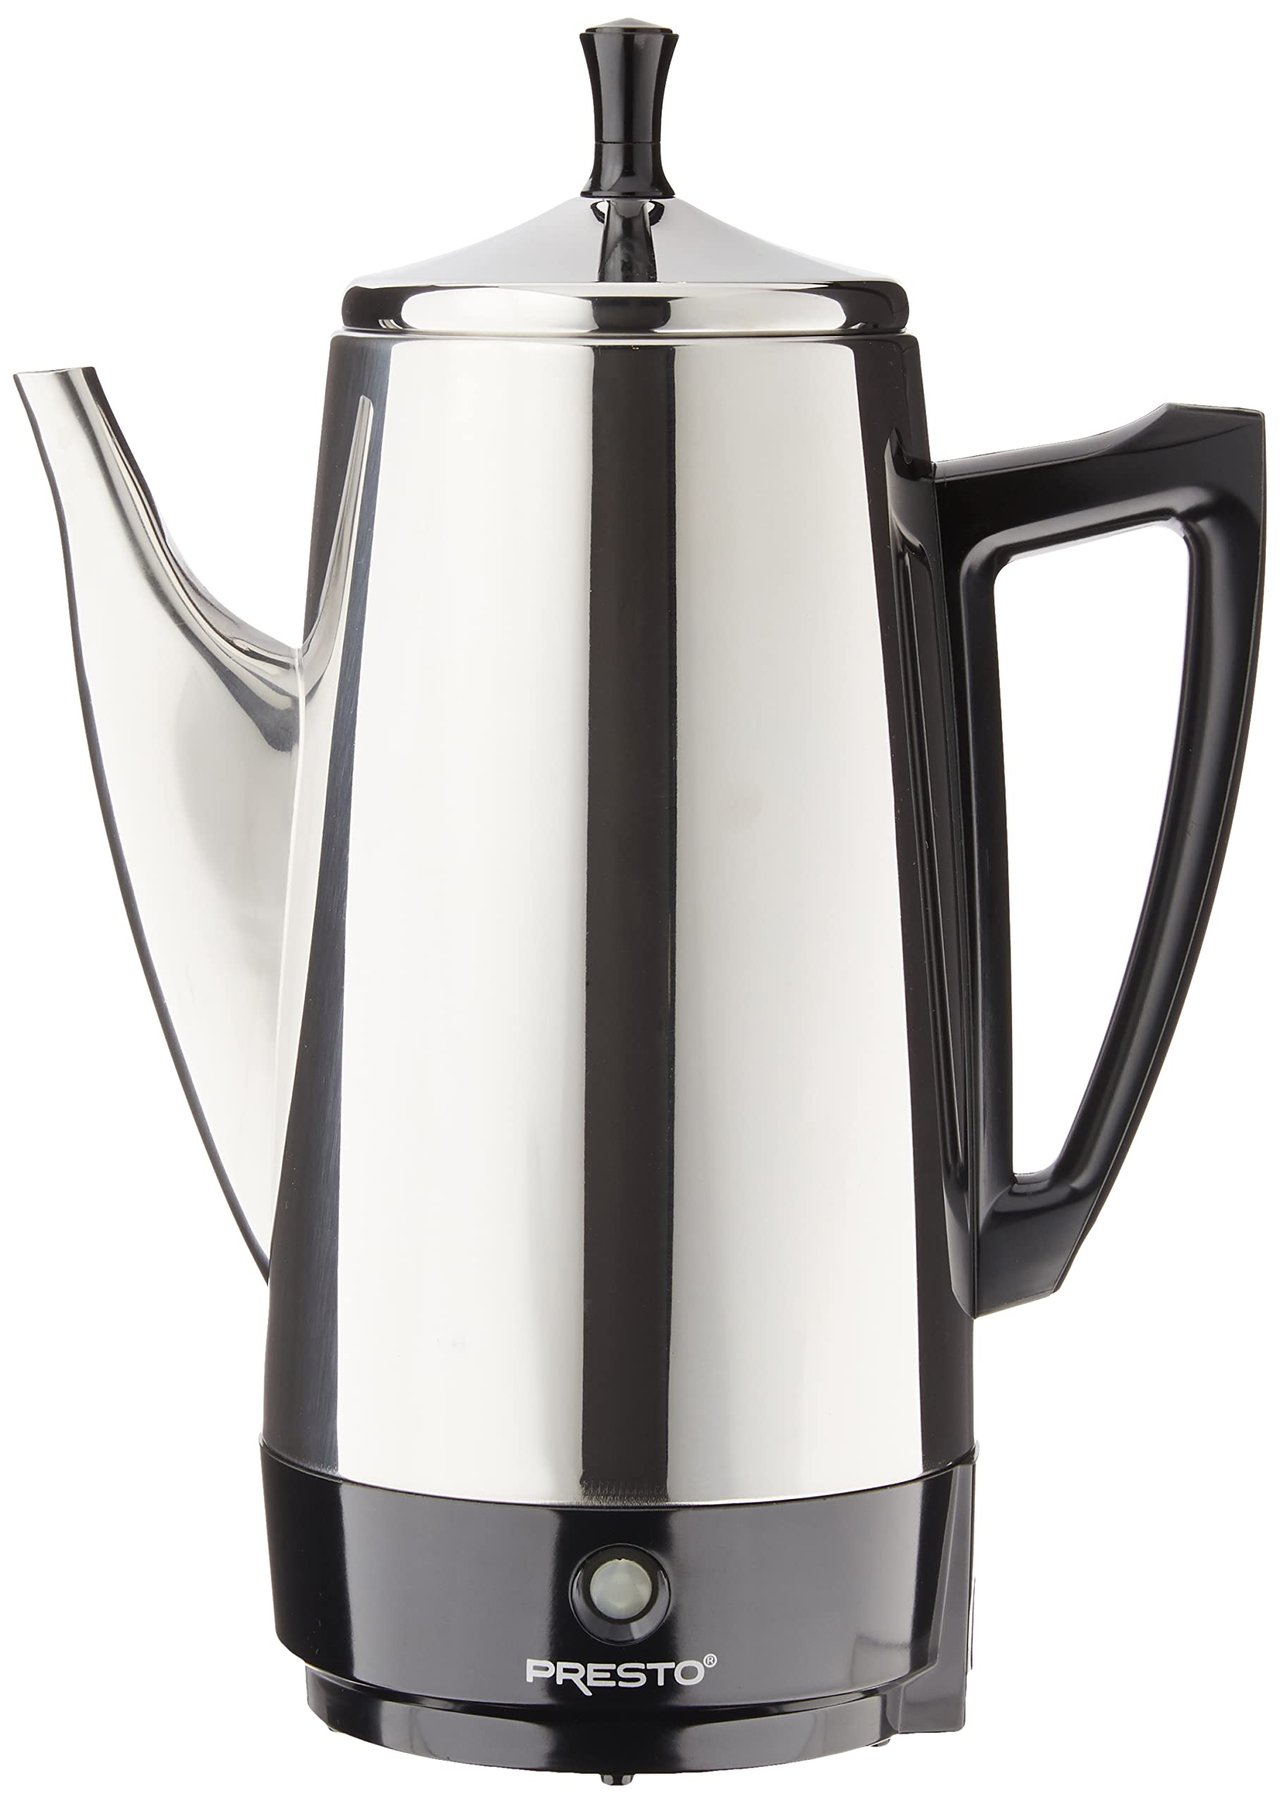 1 Stainless Steel Coffee Maker-12 Cup, manufactured by Presto with model number 02811.